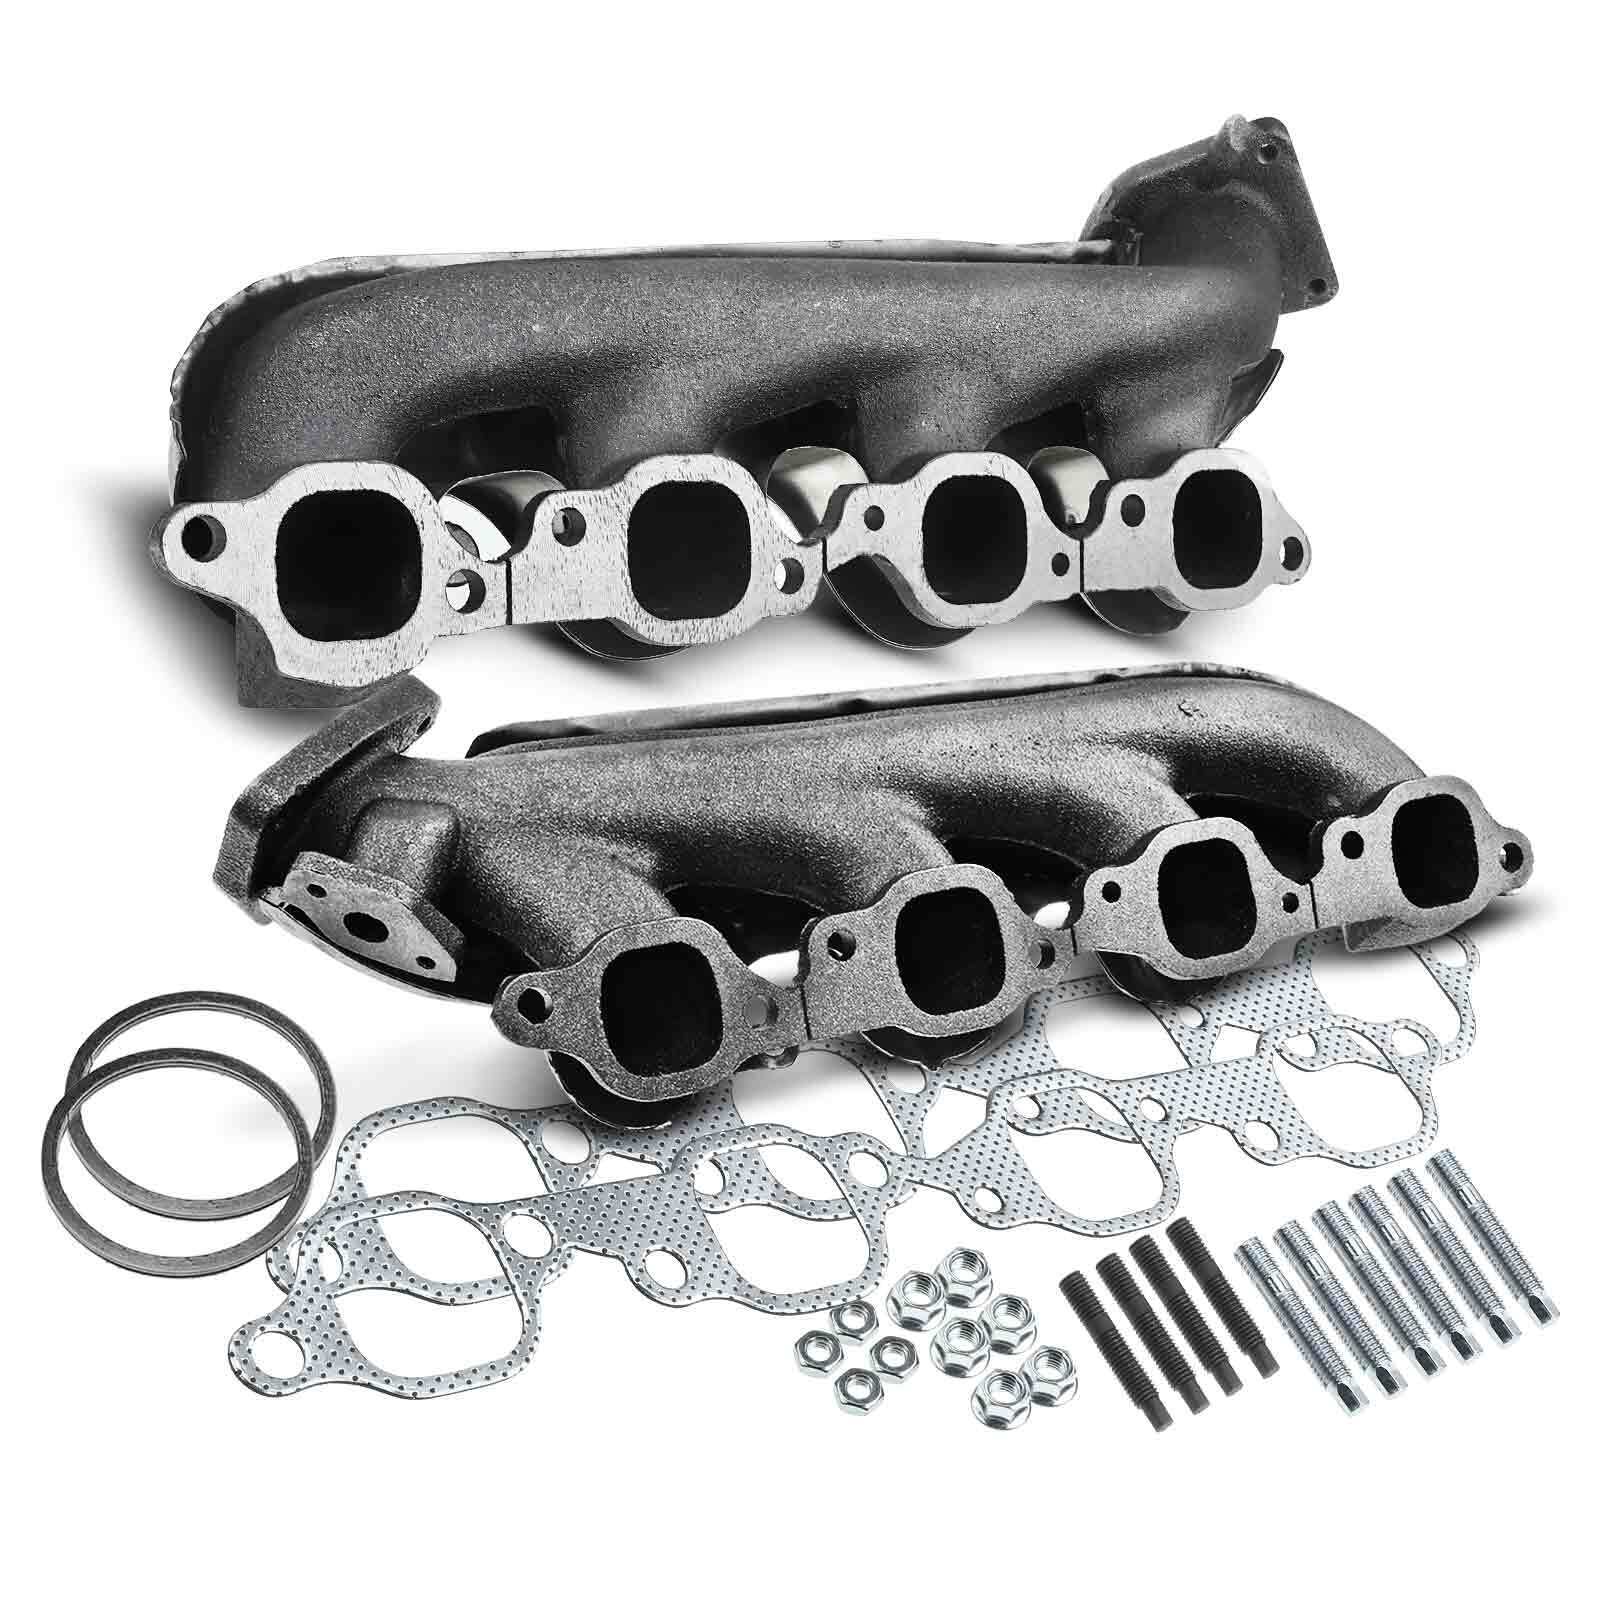 2x Left & Right Side Exhaust Manifold w/ Gasket Kit for Chevrolet GMC V8 8.1L